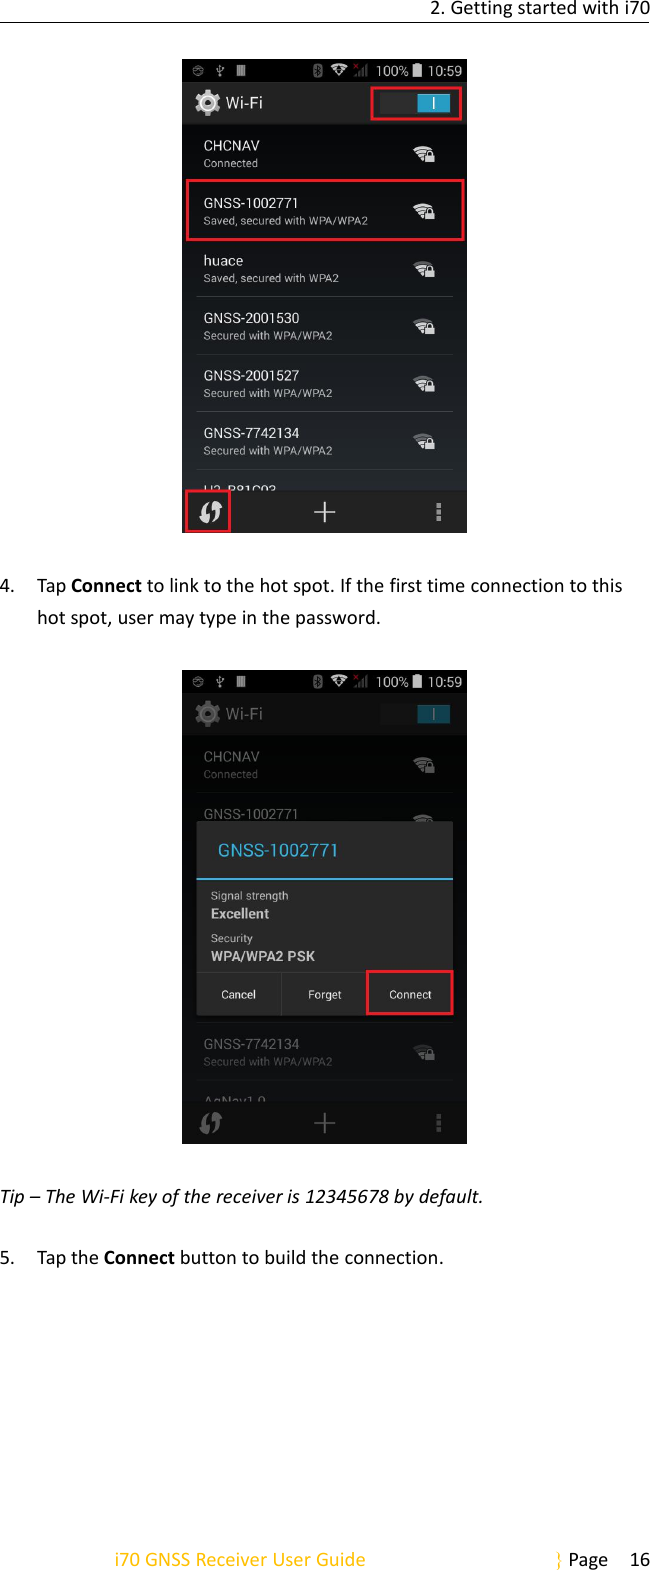 2. Getting started with i70i70 GNSS Receiver User Guide Page 164. Tap Connect to link to the hot spot. If the first time connection to thishot spot, user may type in the password.Tip – The Wi-Fi key of the receiver is 12345678 by default.5. Tap the Connect button to build the connection.